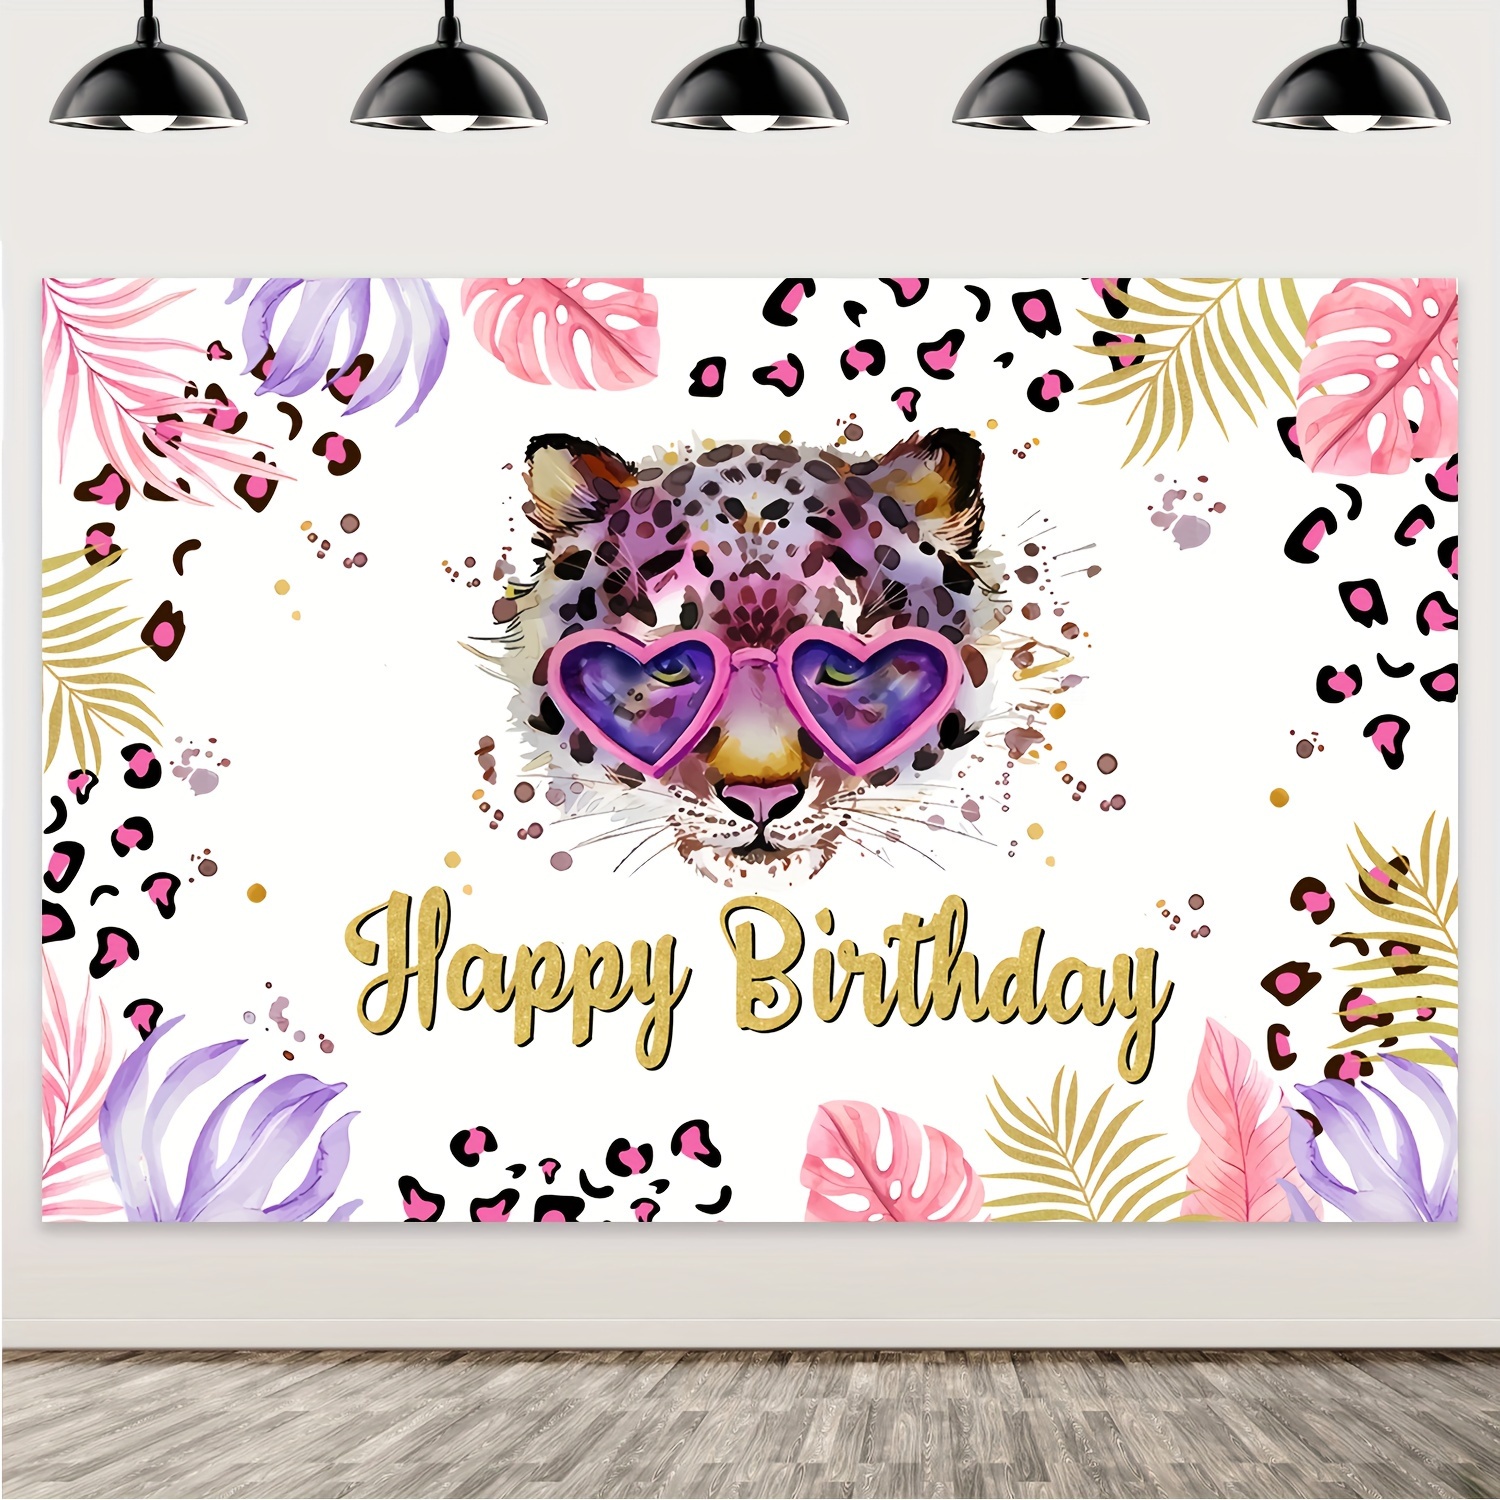 

1pc Pink Cheetah Theme Happy Birthday Background Birthday Party Photography Backdrop For Birthday Party Decoration Supplies